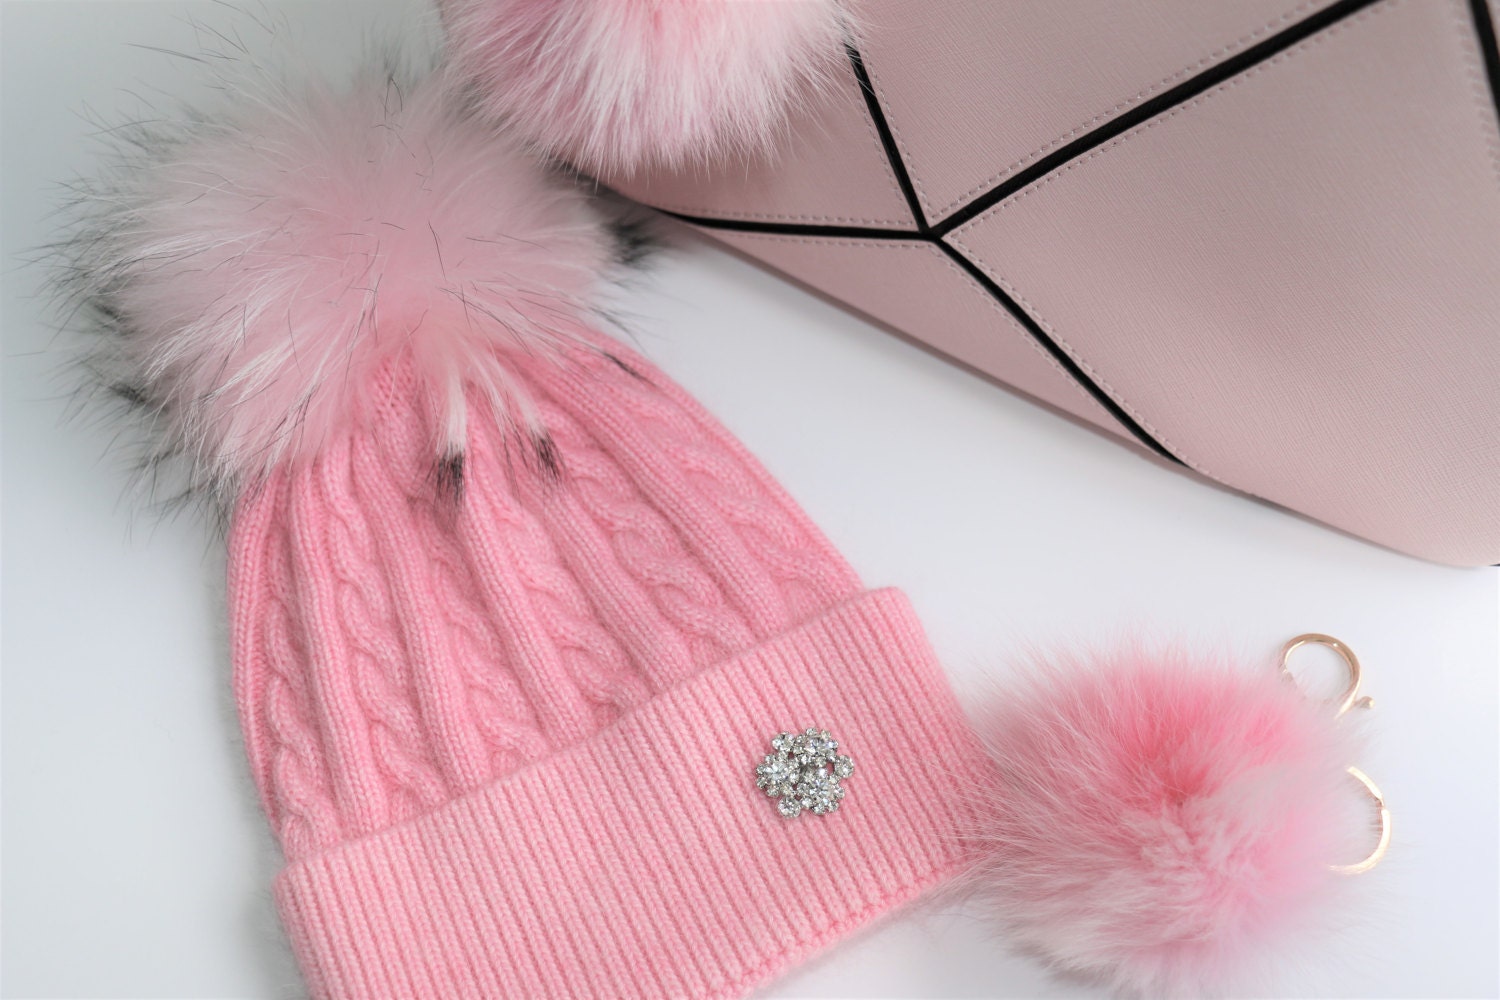 Hot Pink Cashmere Beanie with Matching Pink Raccoon Pom Pom